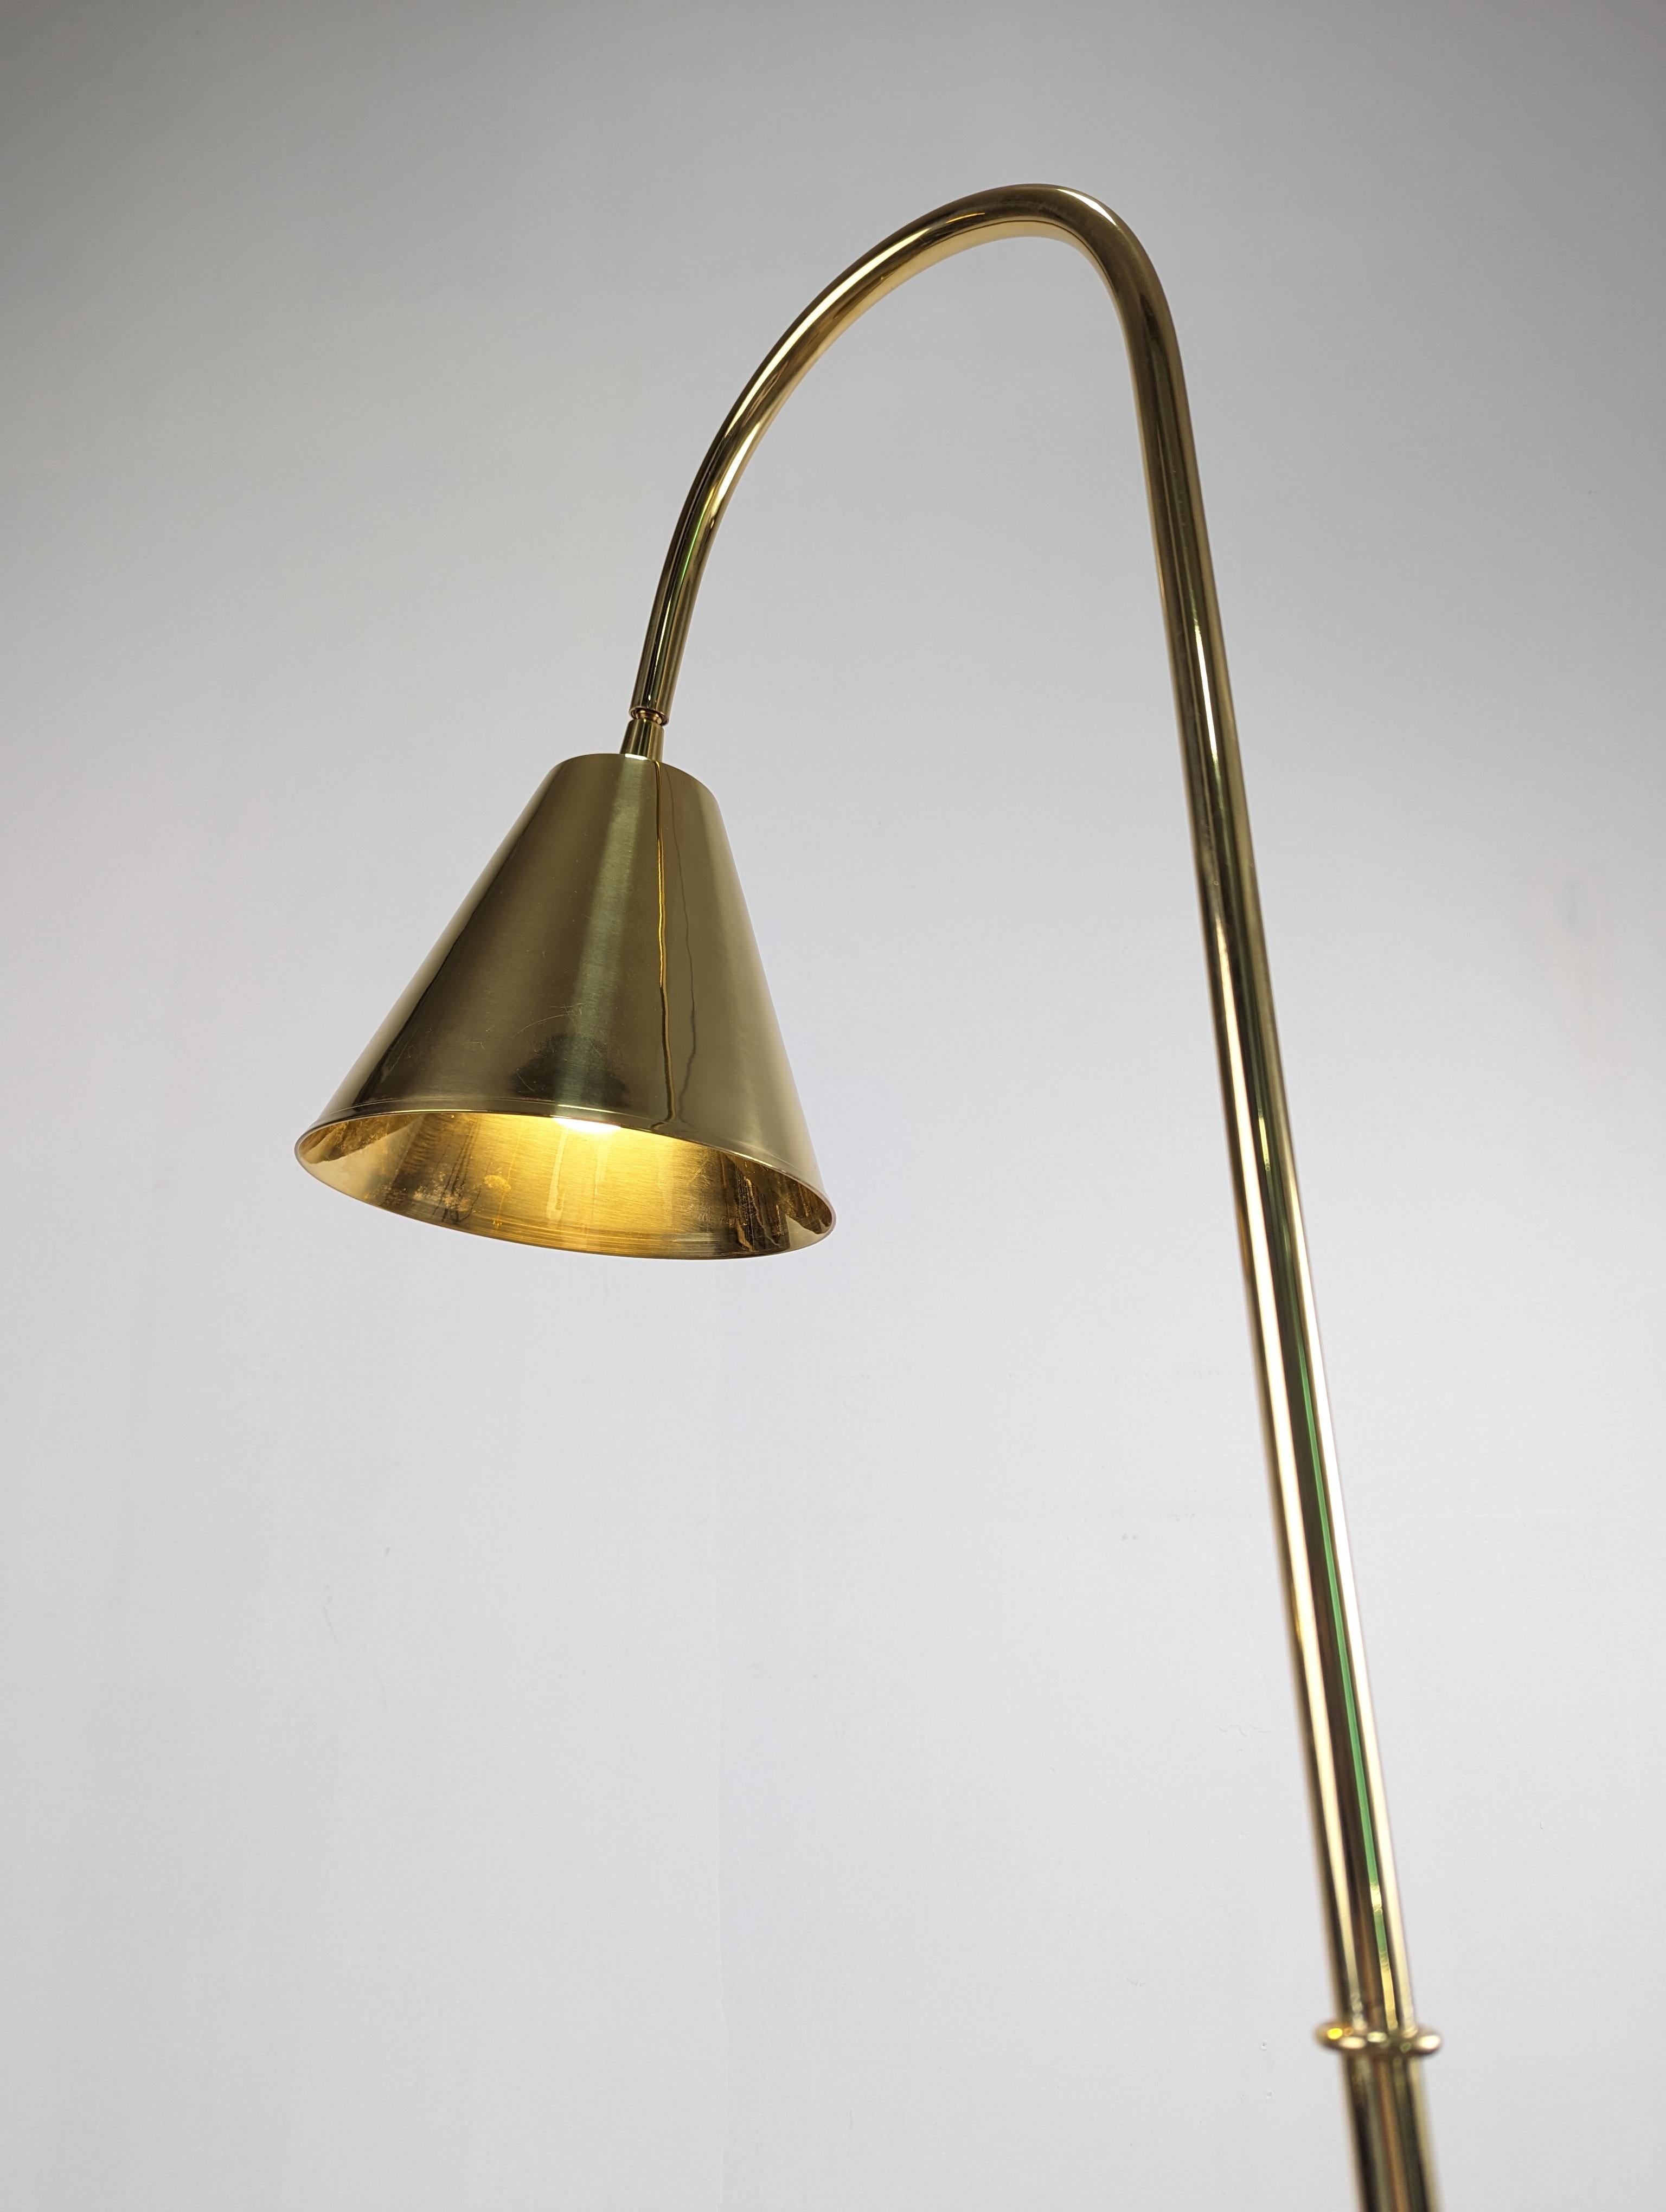 20th Century Jacques Adnet floor lamp by Valentí in brass